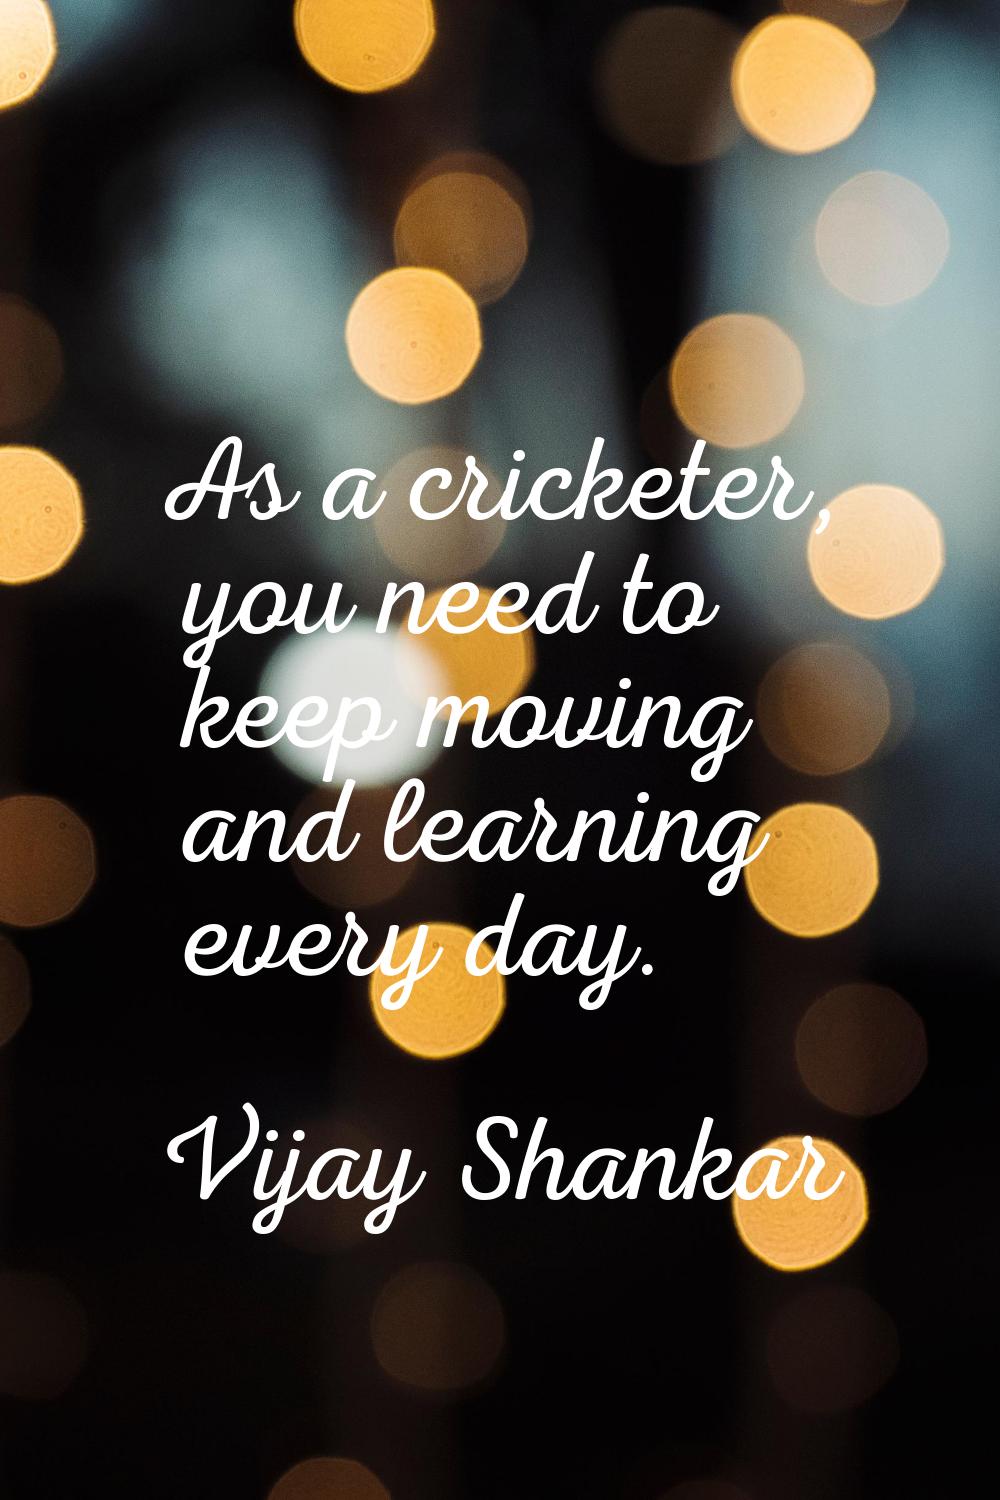 As a cricketer, you need to keep moving and learning every day.